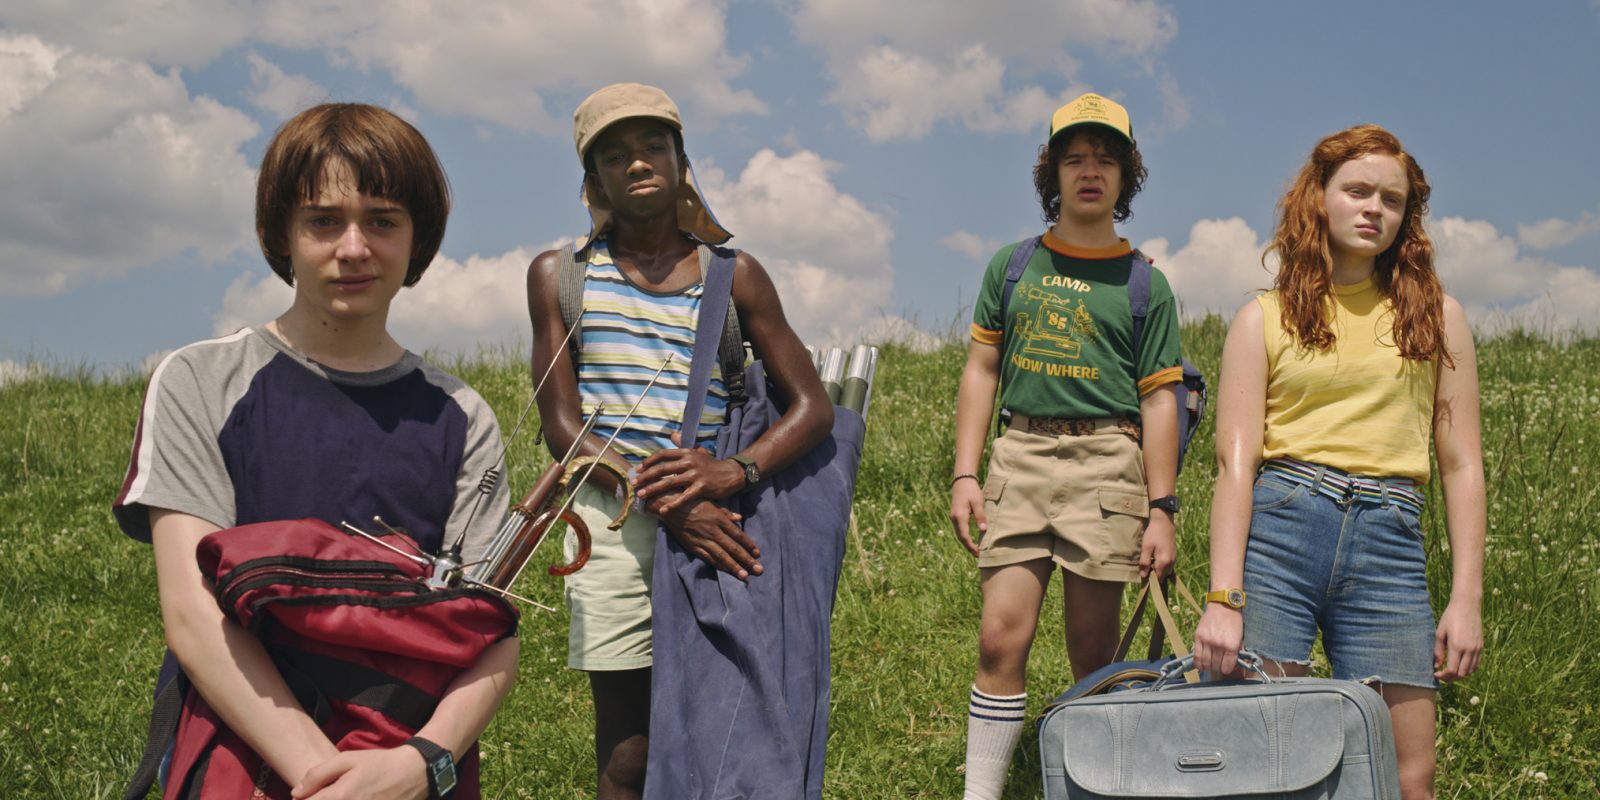 Which Two Stranger Things Characters Are You A Combo Of? St3 Production Still 9